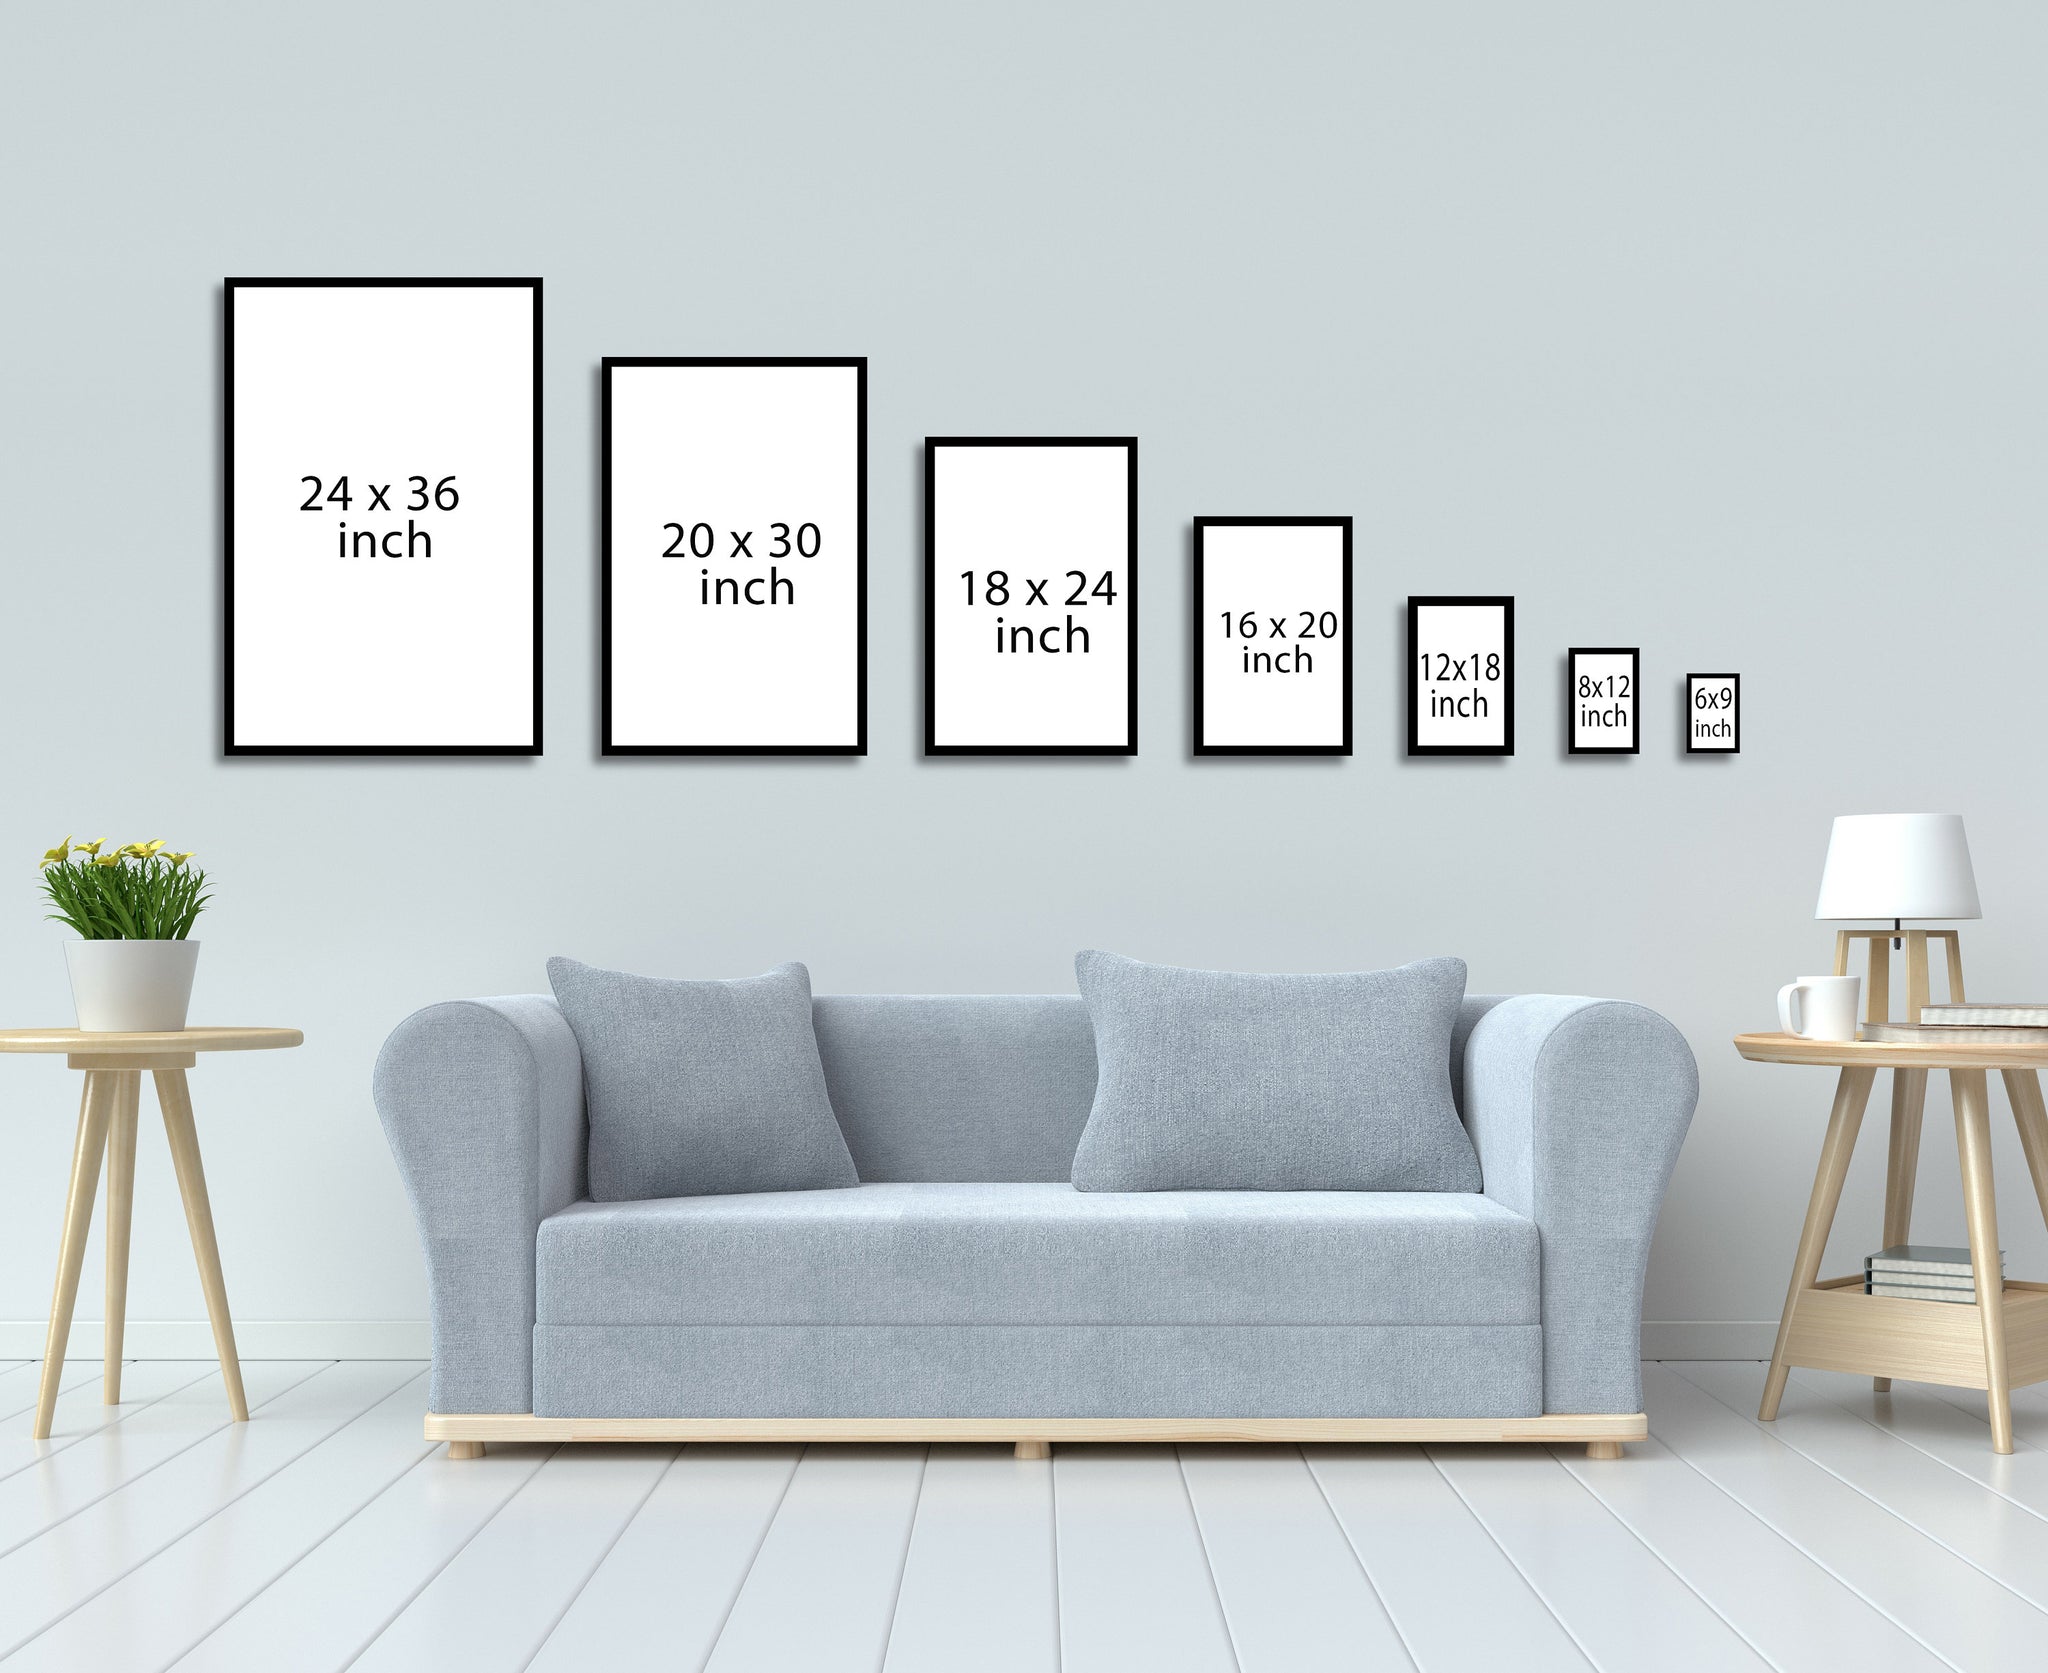 Gym wall art, Gym Poster, Gym quote, Gym Decor, Home wall art, Home gym decor, Home gym poster, Home wall decor, Fitness, Office Walll quote